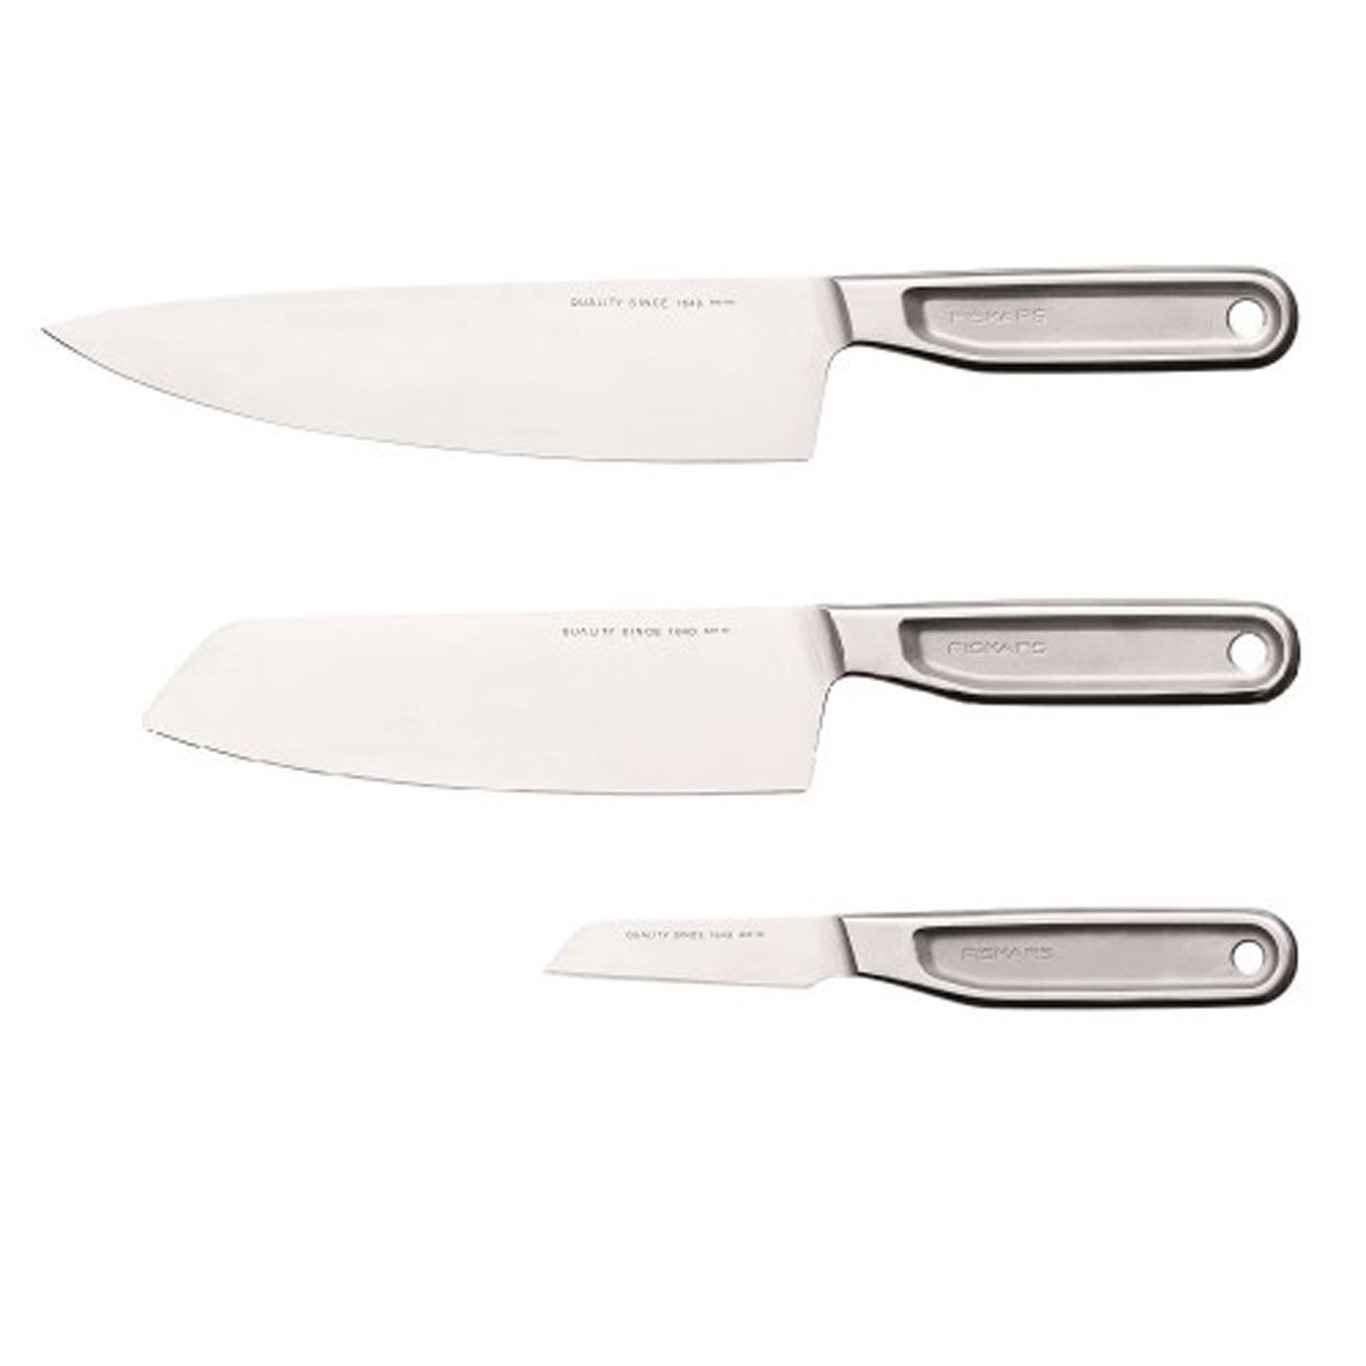 All Steel Knife Set, 3 Pieces